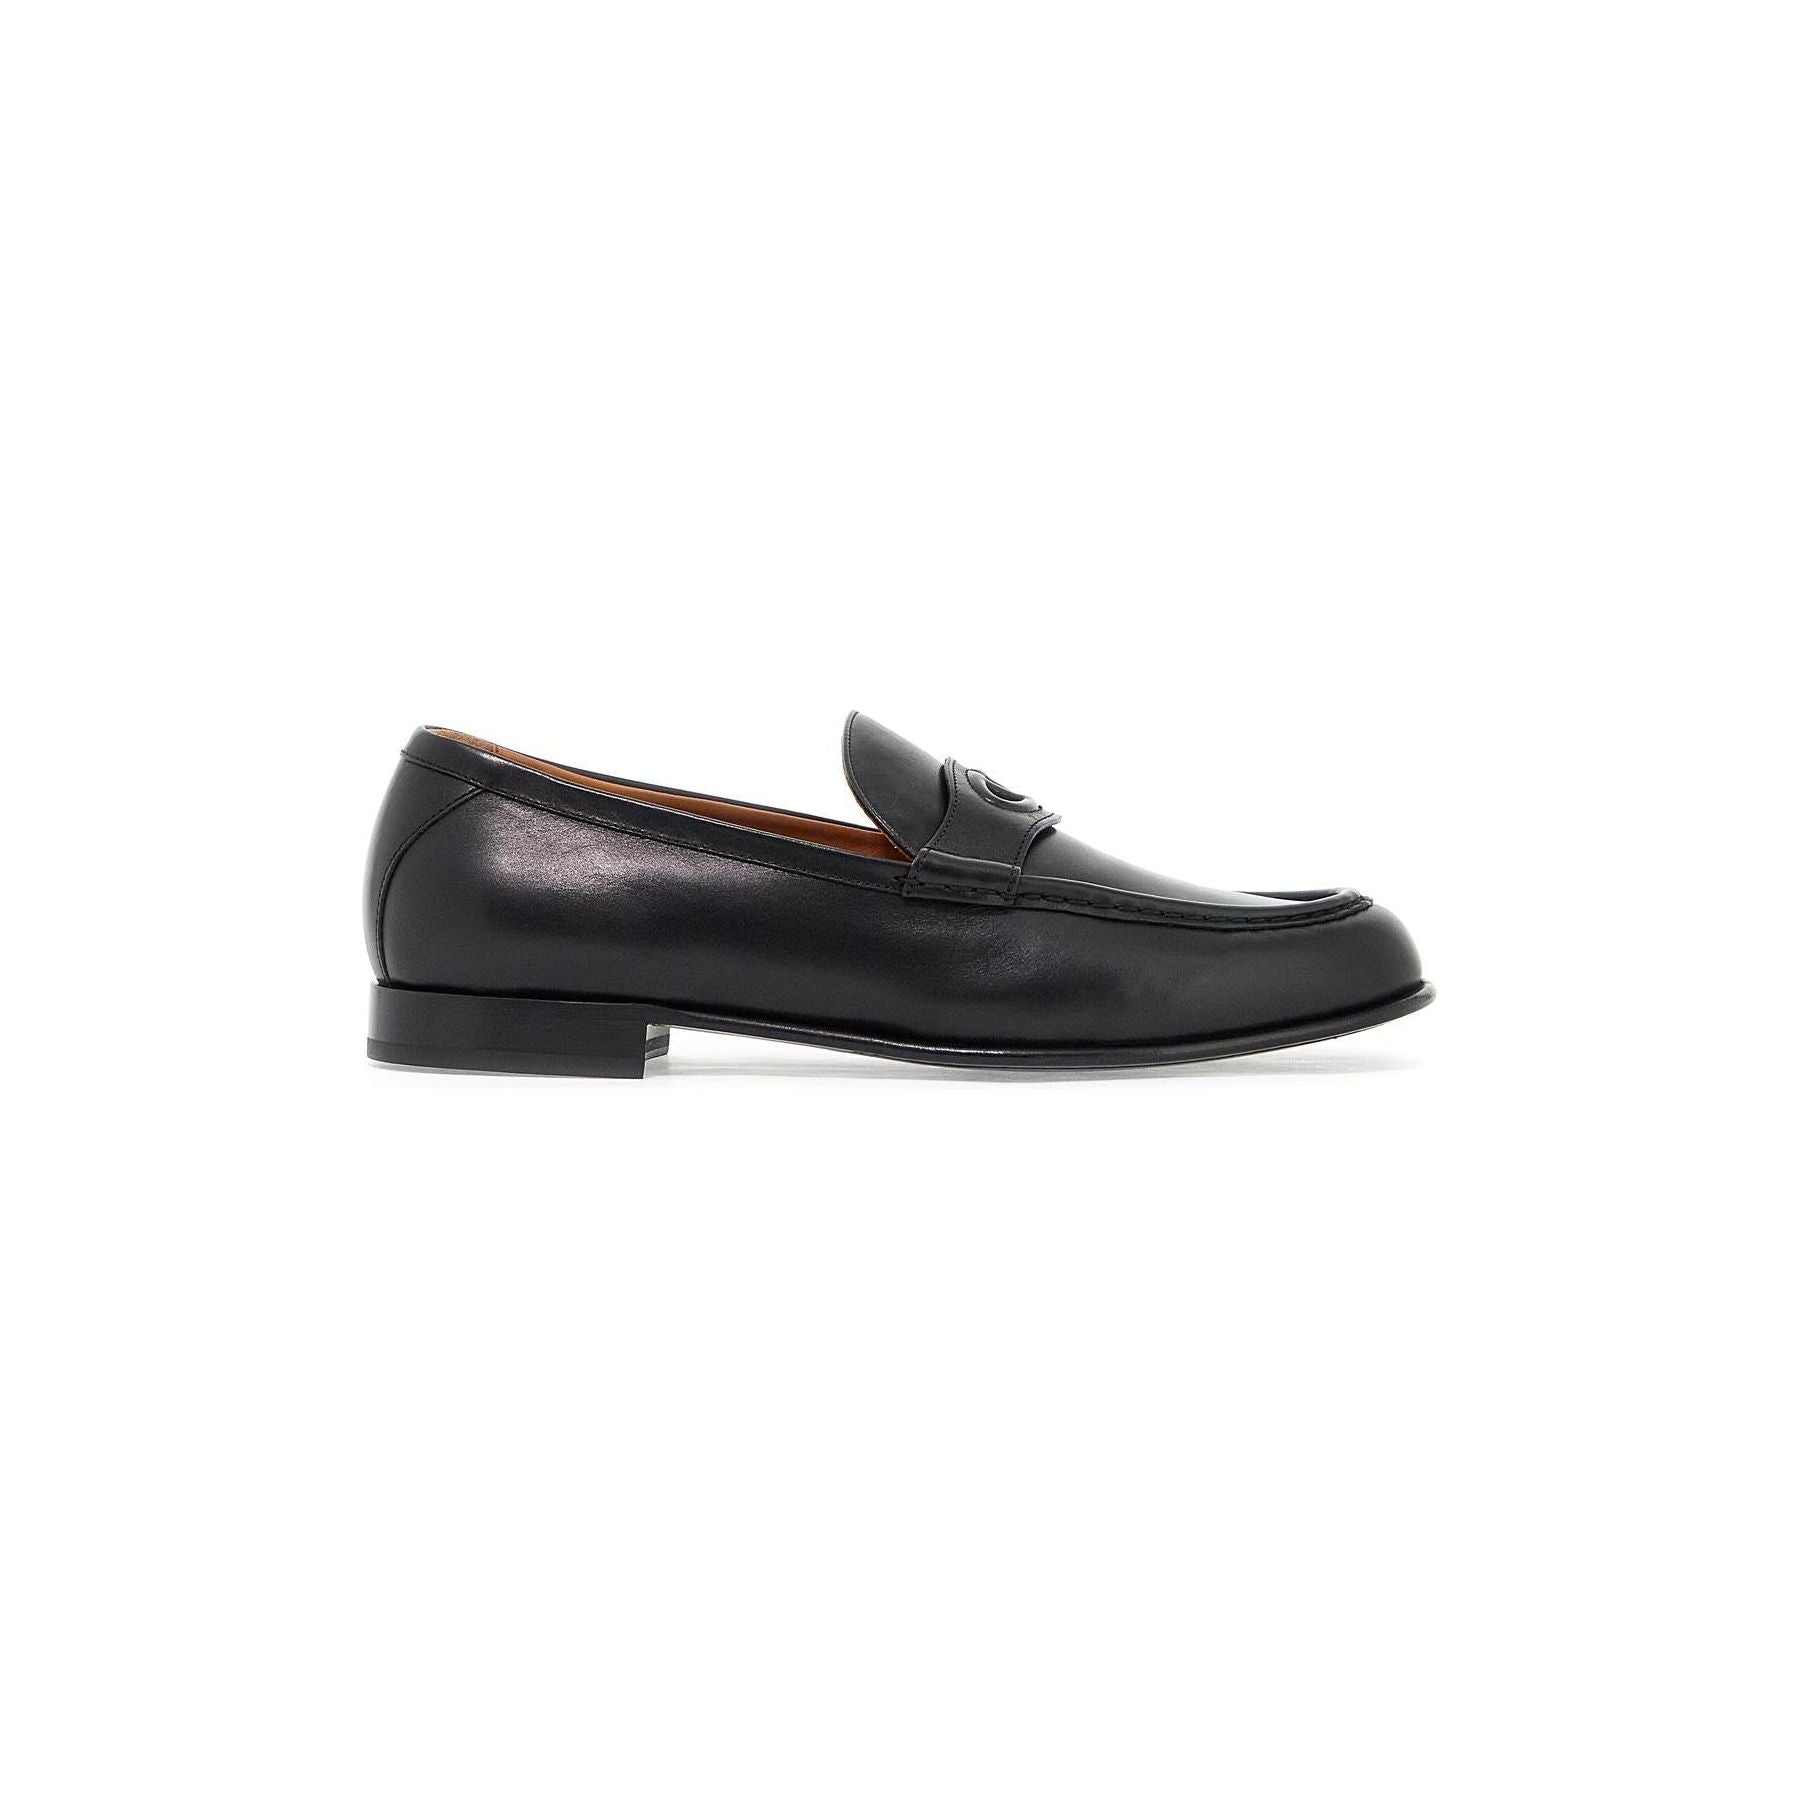 Signature VLogo Leather Loafers